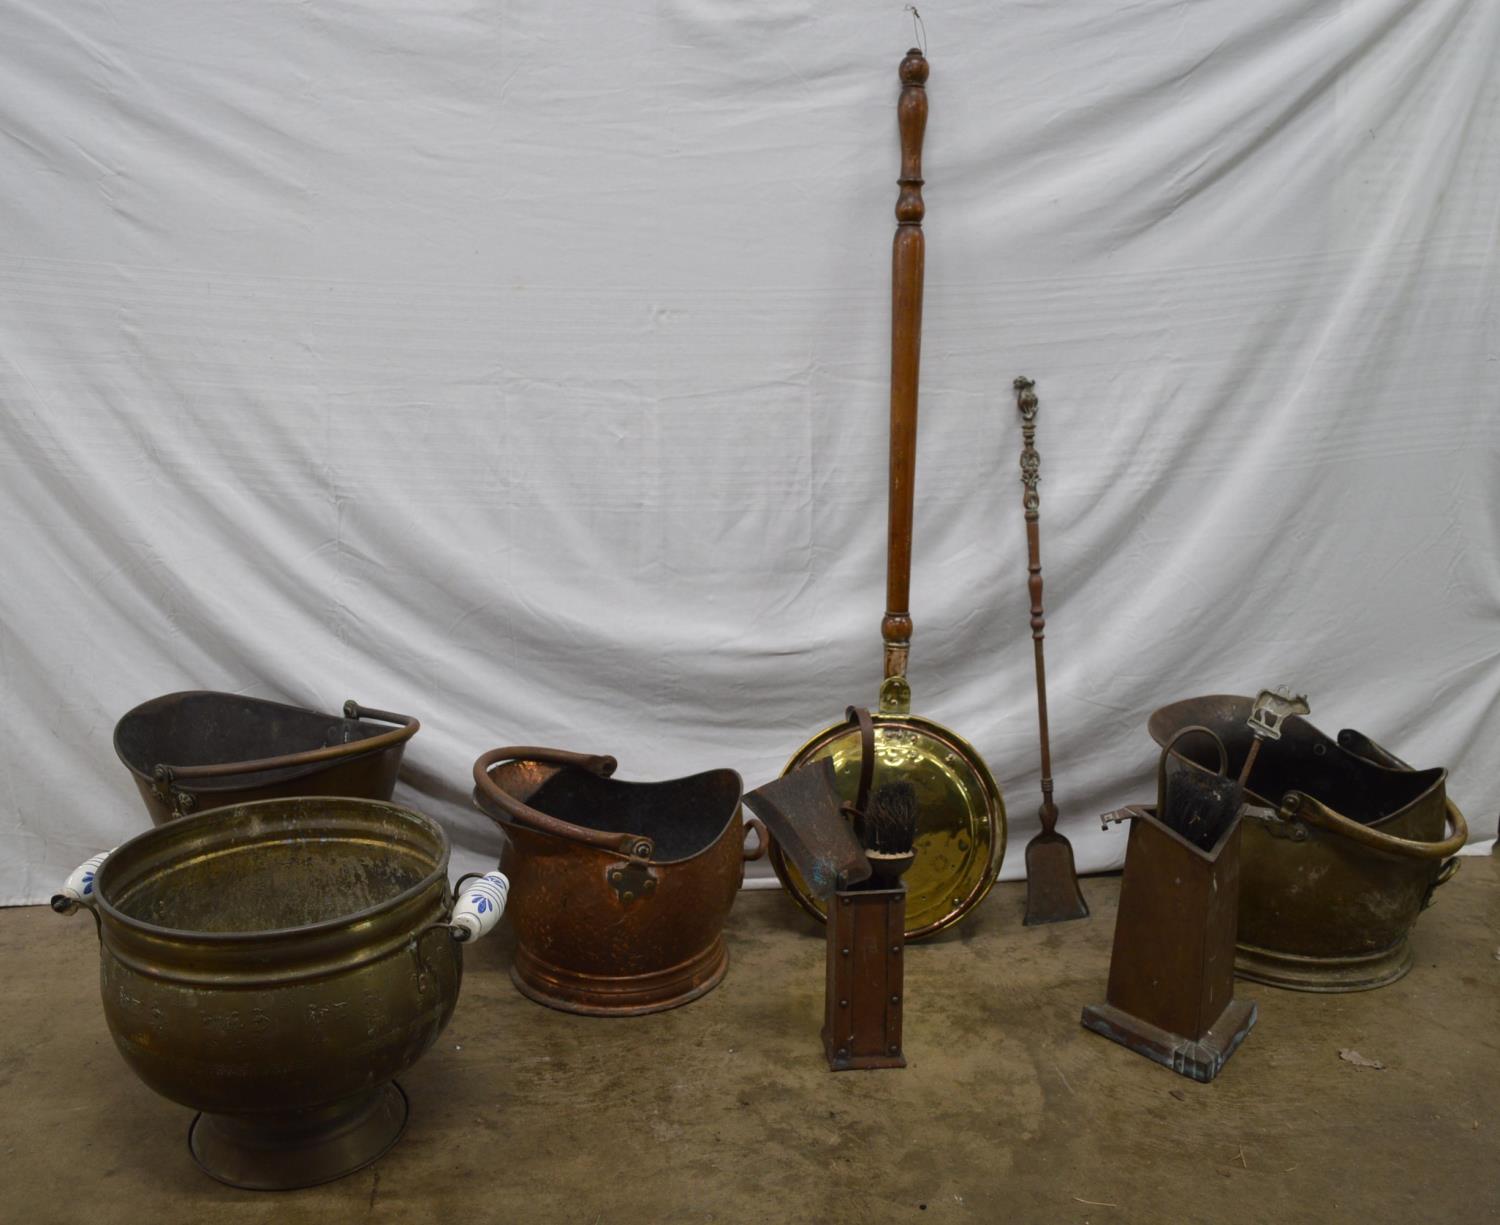 Group of four brass and copper coal scuttles together with a brass warming pan and fire side tools - Image 2 of 2